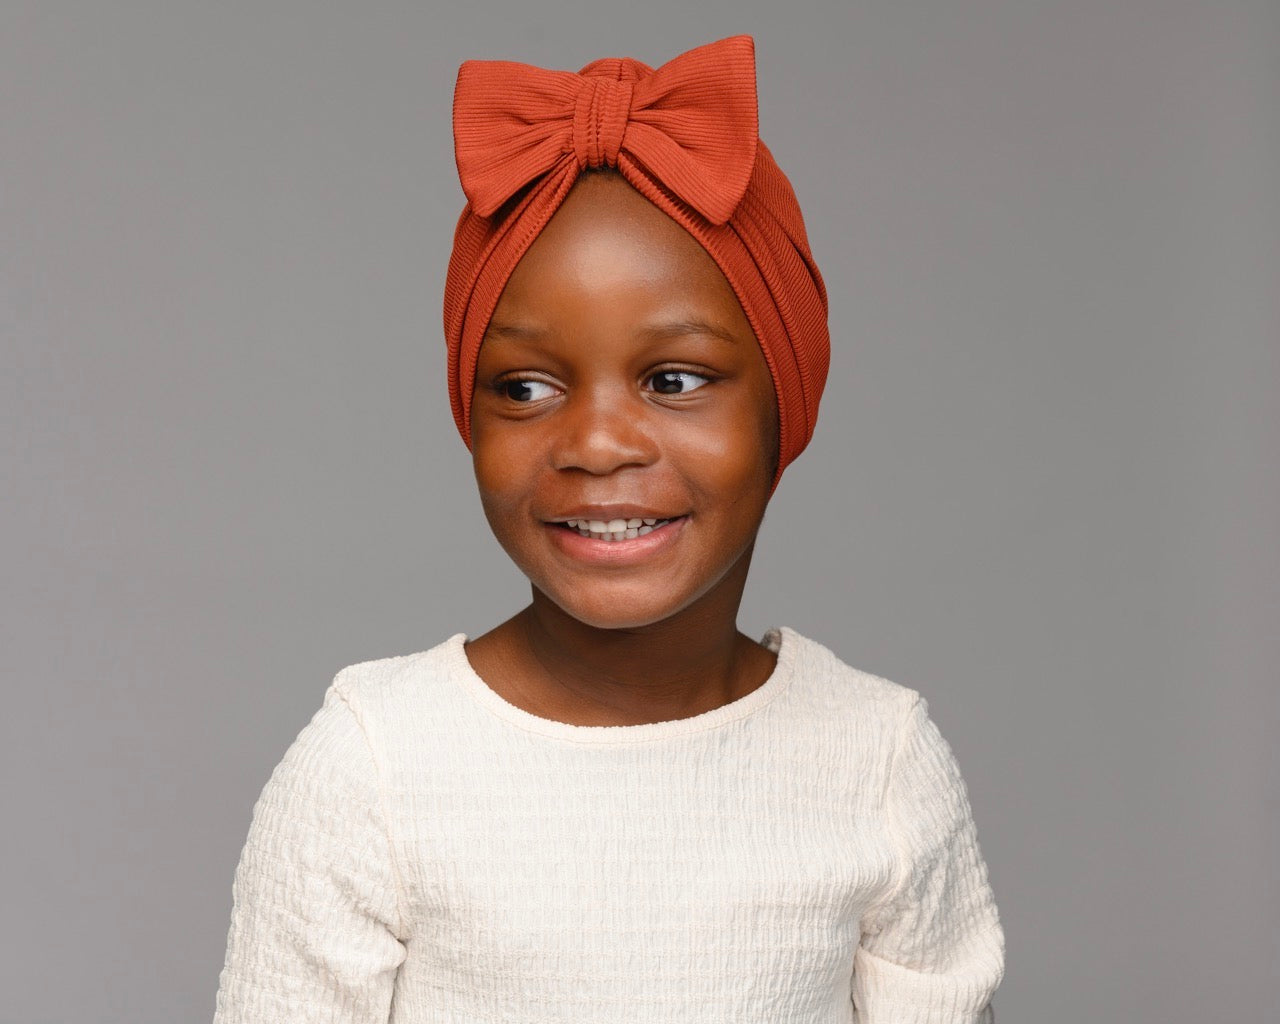 Child model wearing auburn turban with a bow